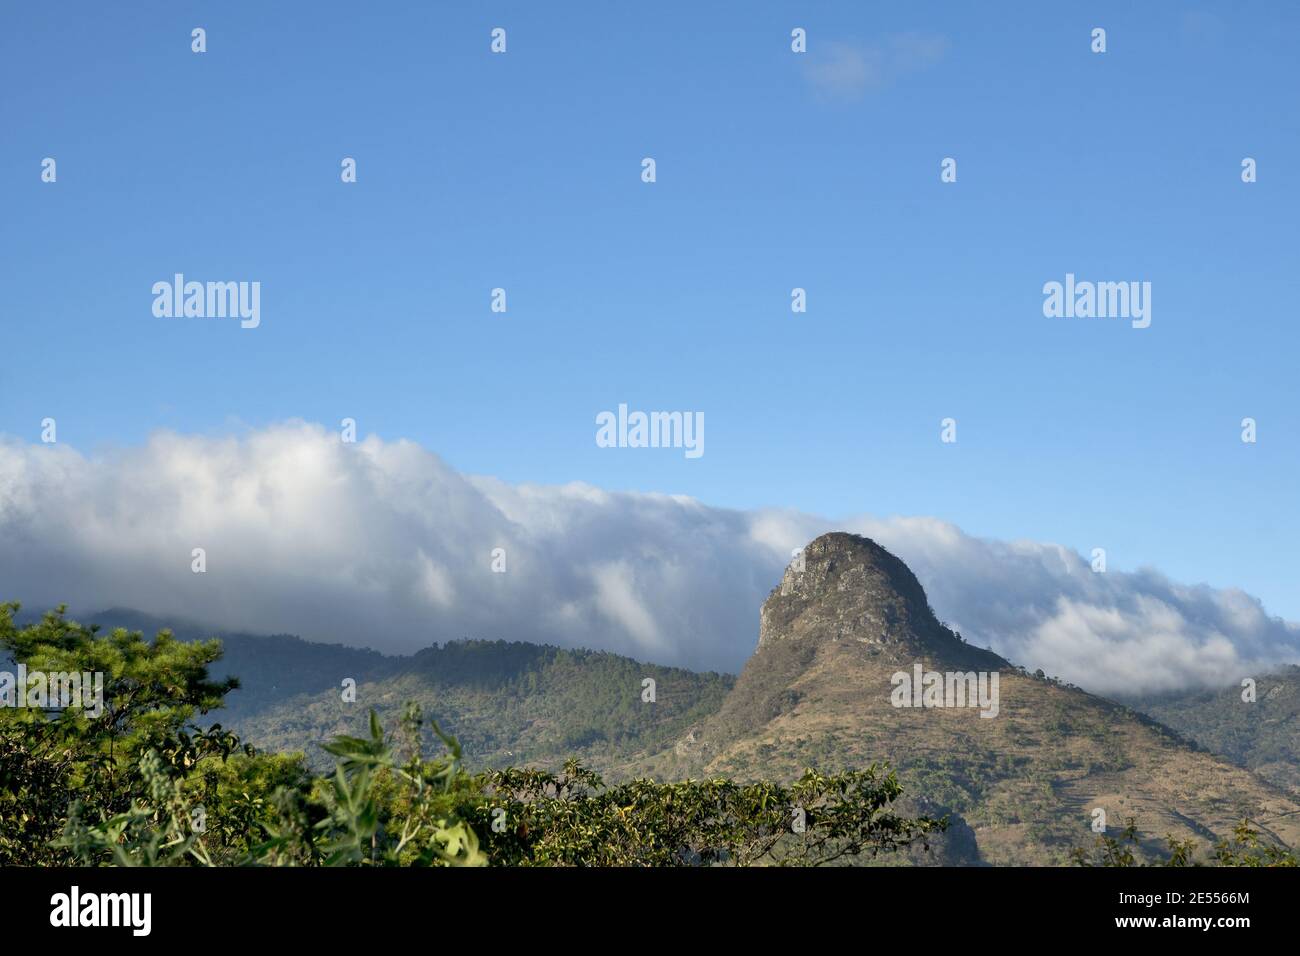 Central America: in the highlands on the border between Guatemala and Honduras. Stock Photo